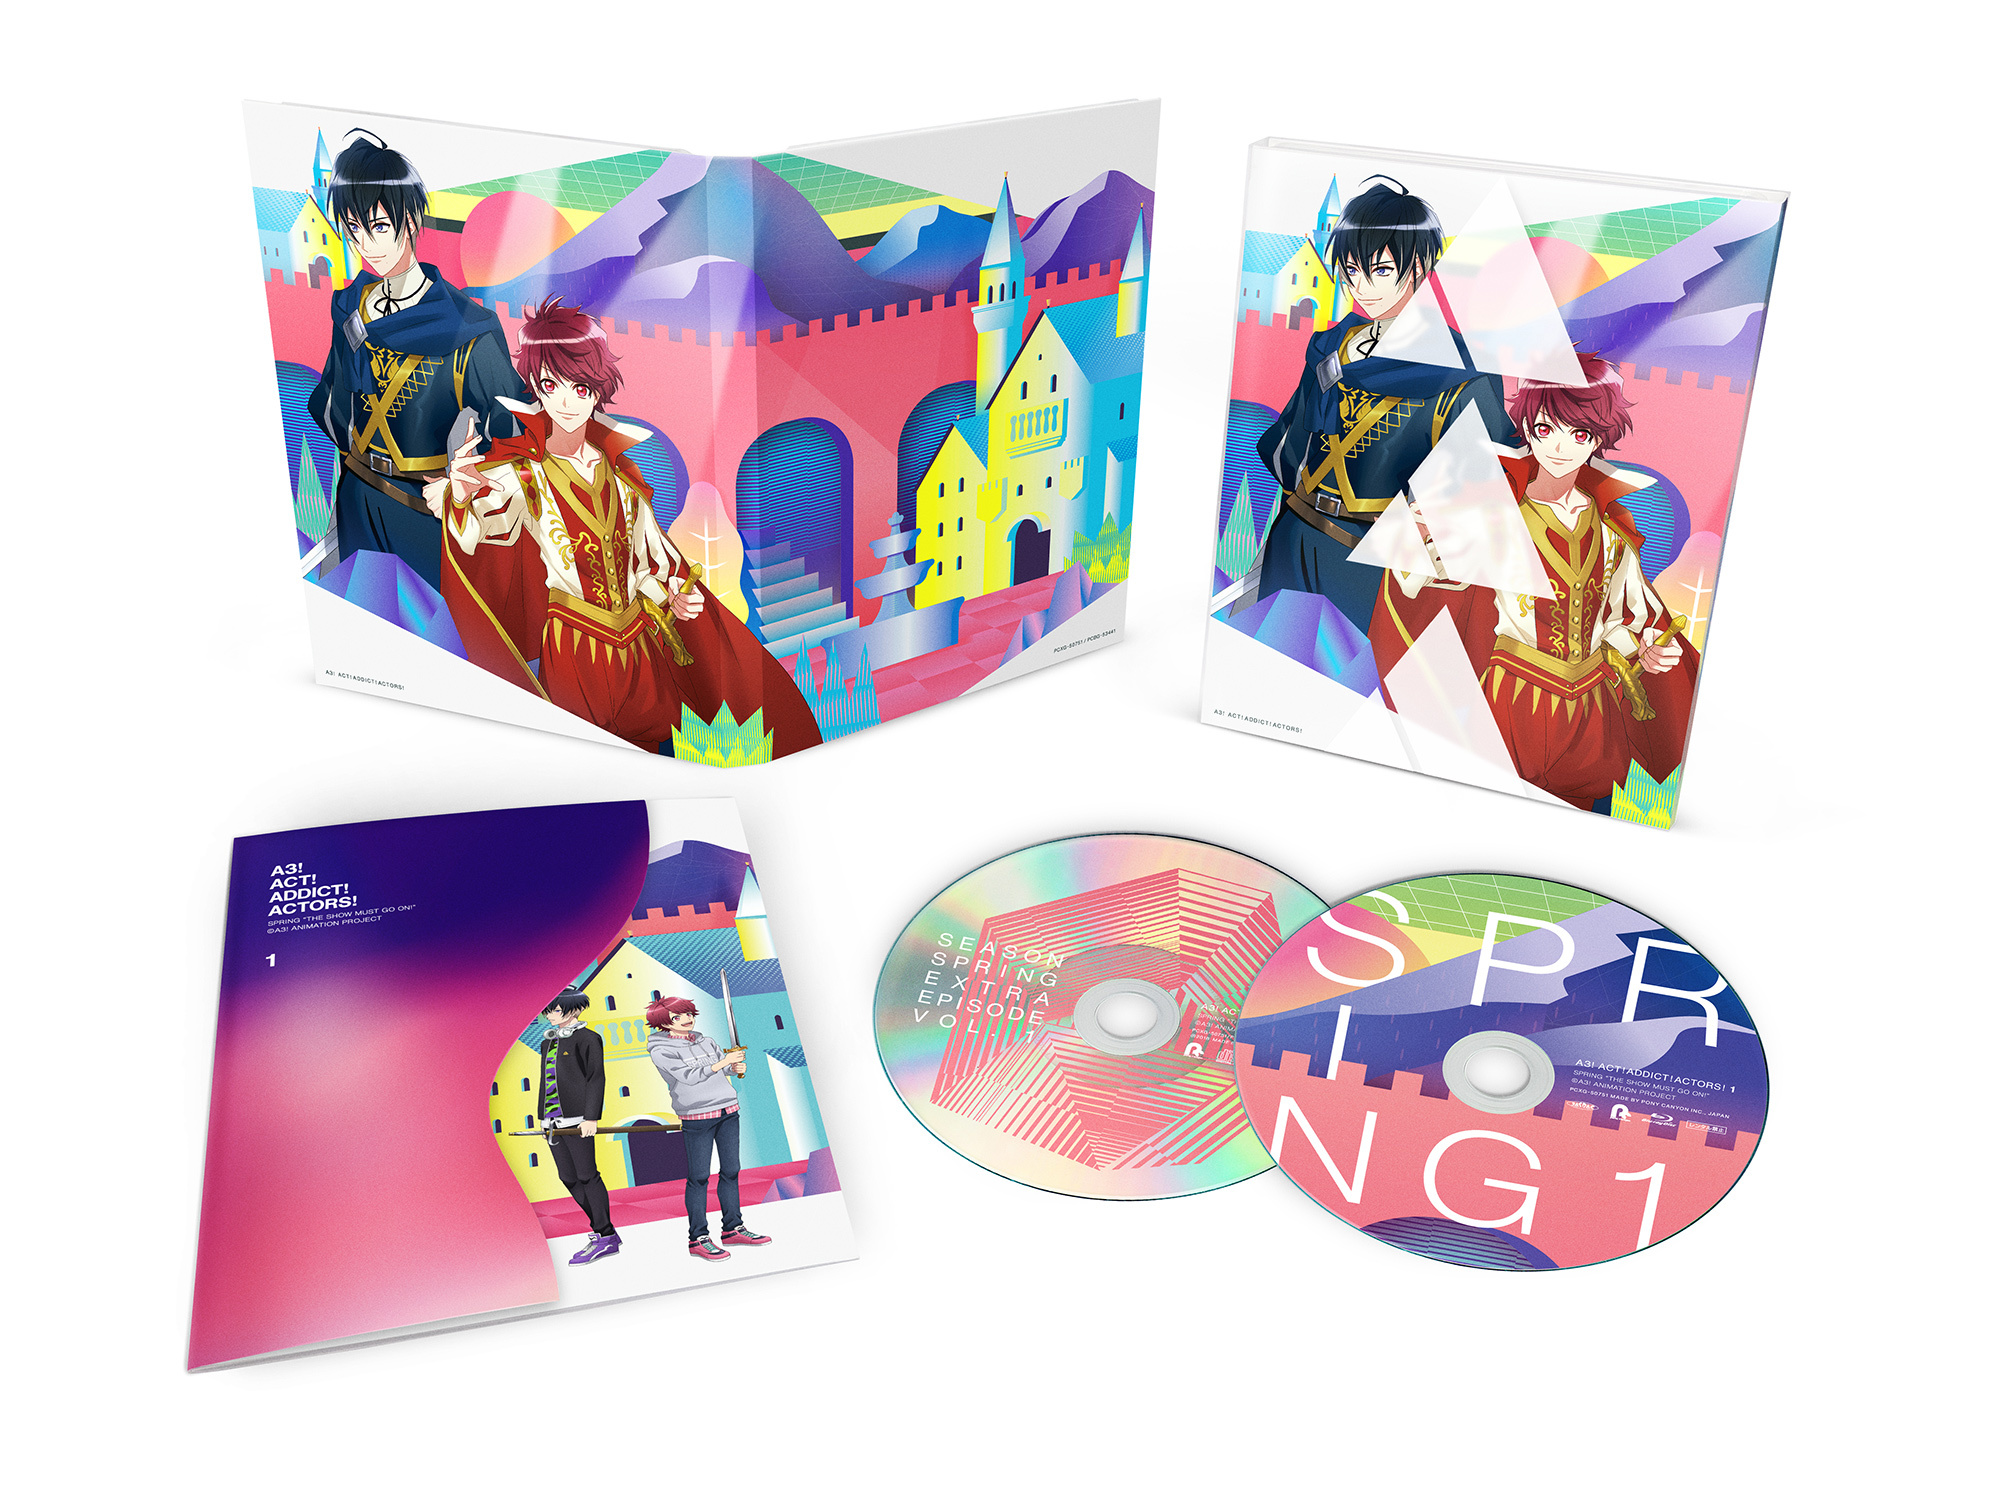 TVアニメ『A3!』Blu-ray＆DVD 第1巻　展開  (C)Liber Entertainment Inc. All Rights Reserved.